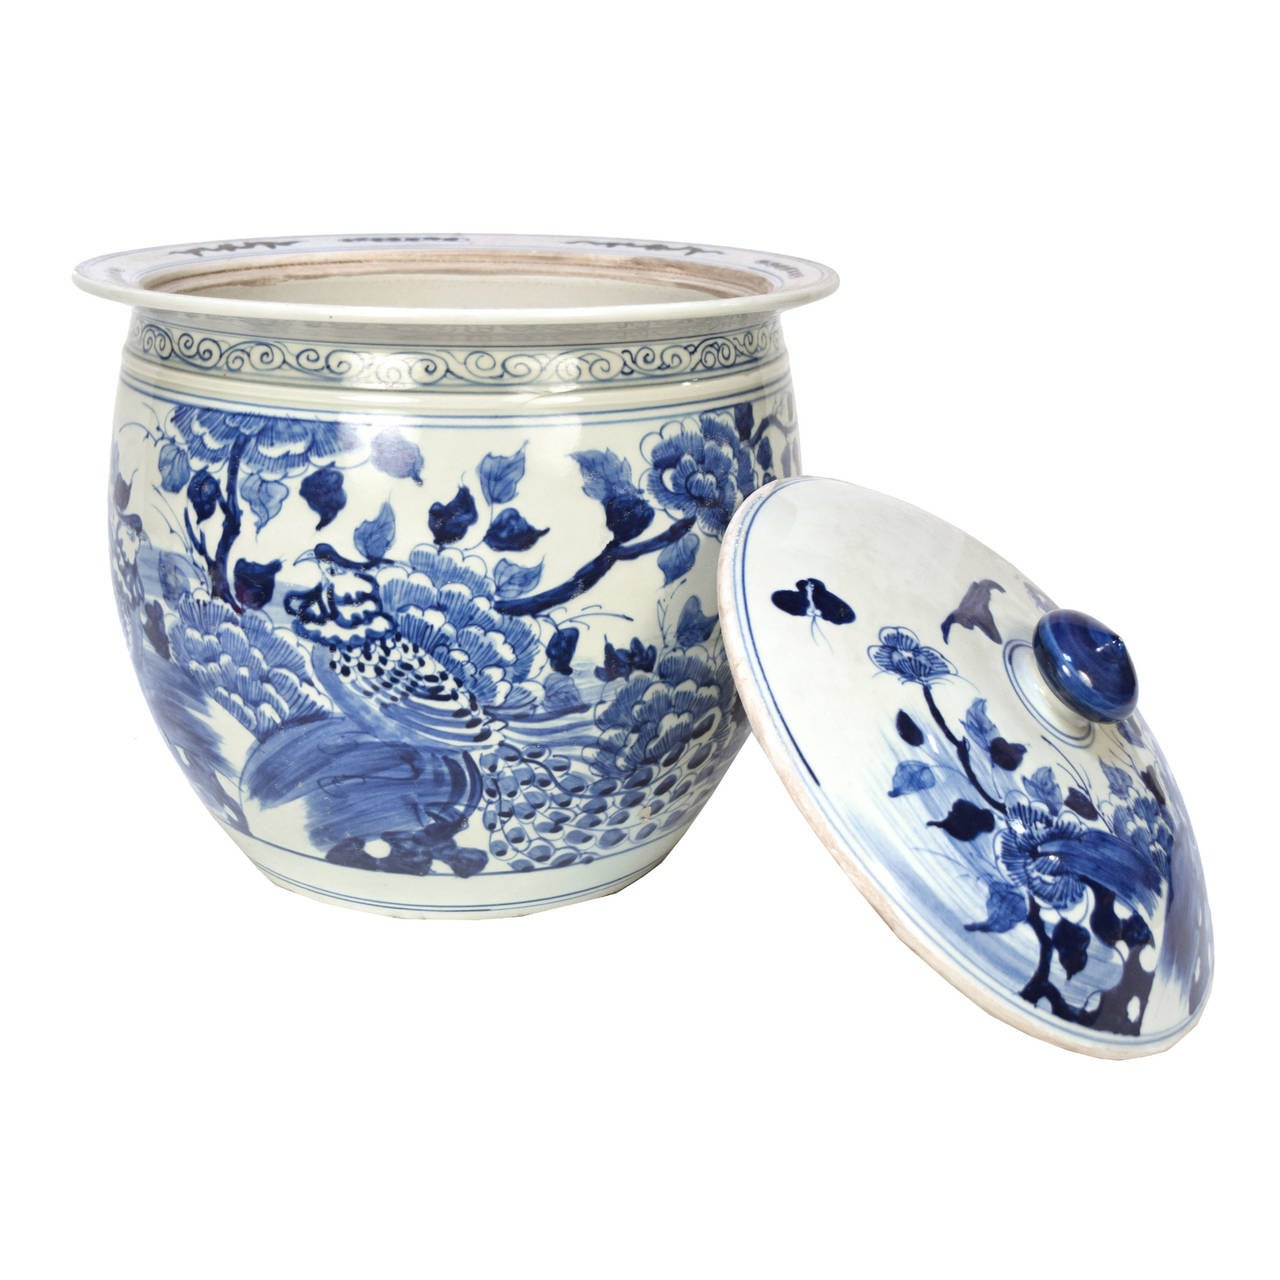 20th Century Chinese Blue and White Covered Jar